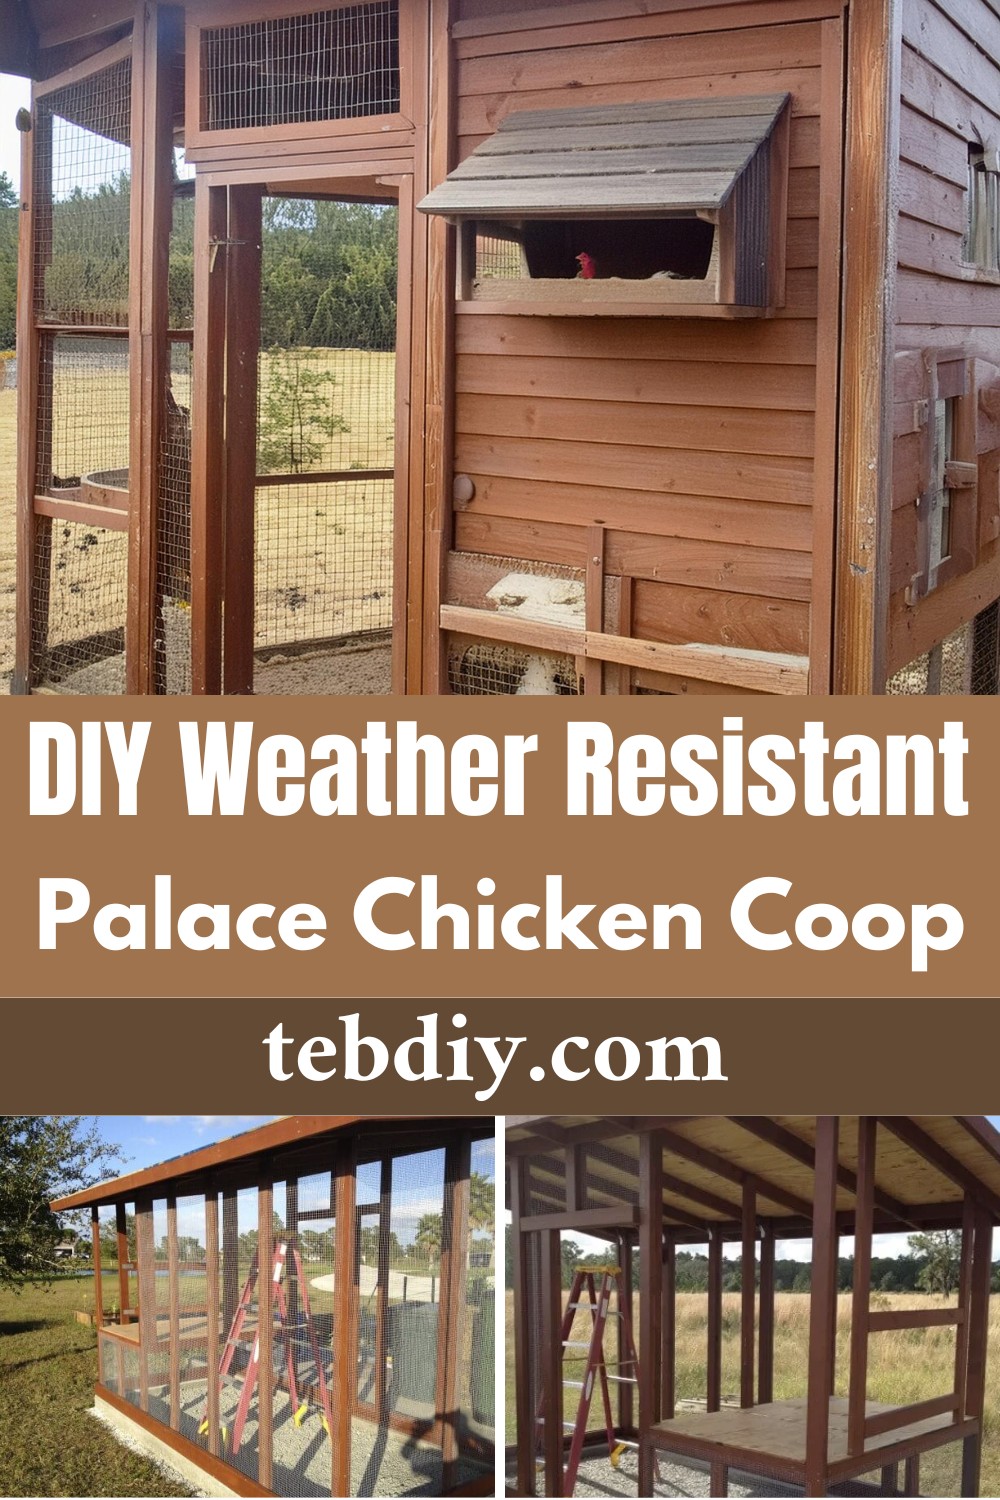 How To DIY Weather Resistant Palace Chicken Coop